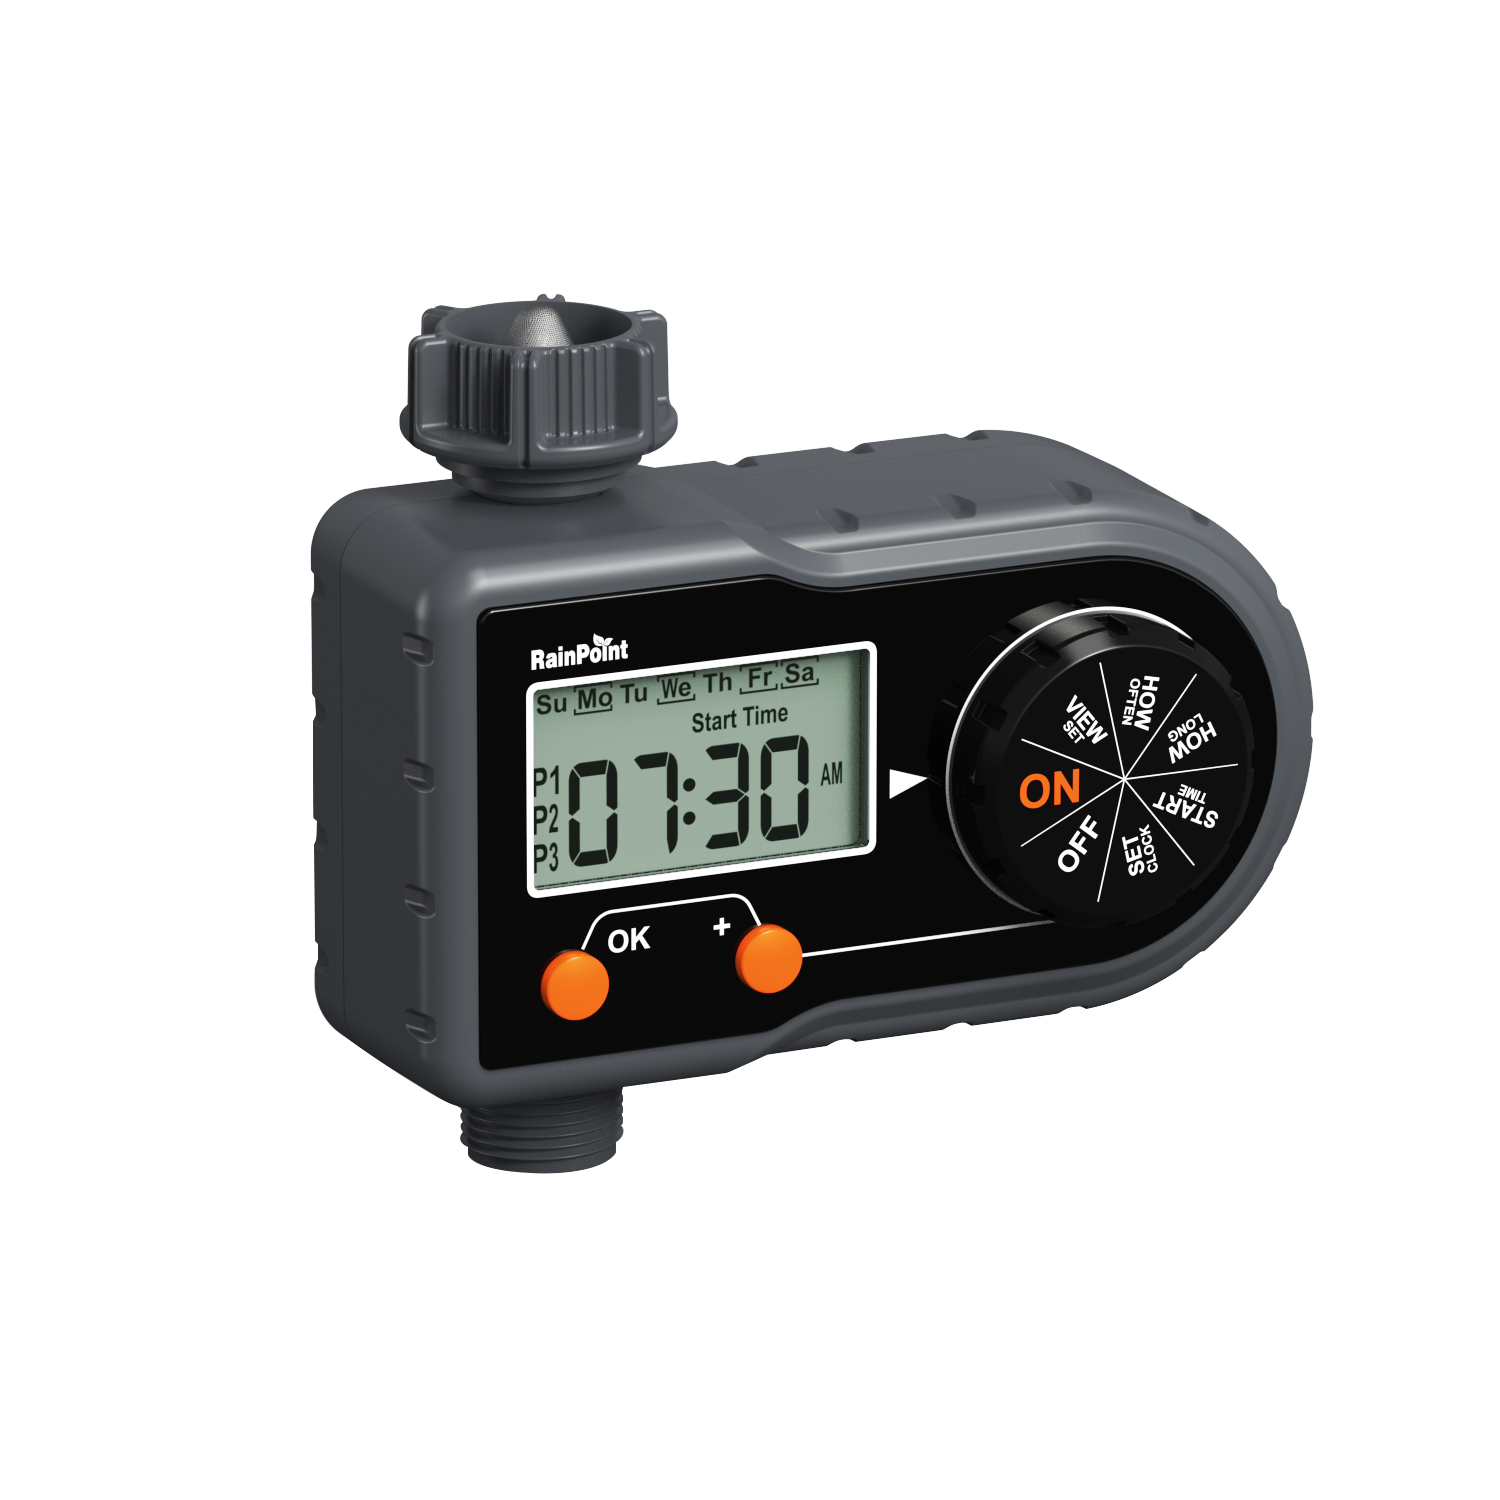 【ITV101P】DIGITAL HOSE TIMER WITH BIG LCD